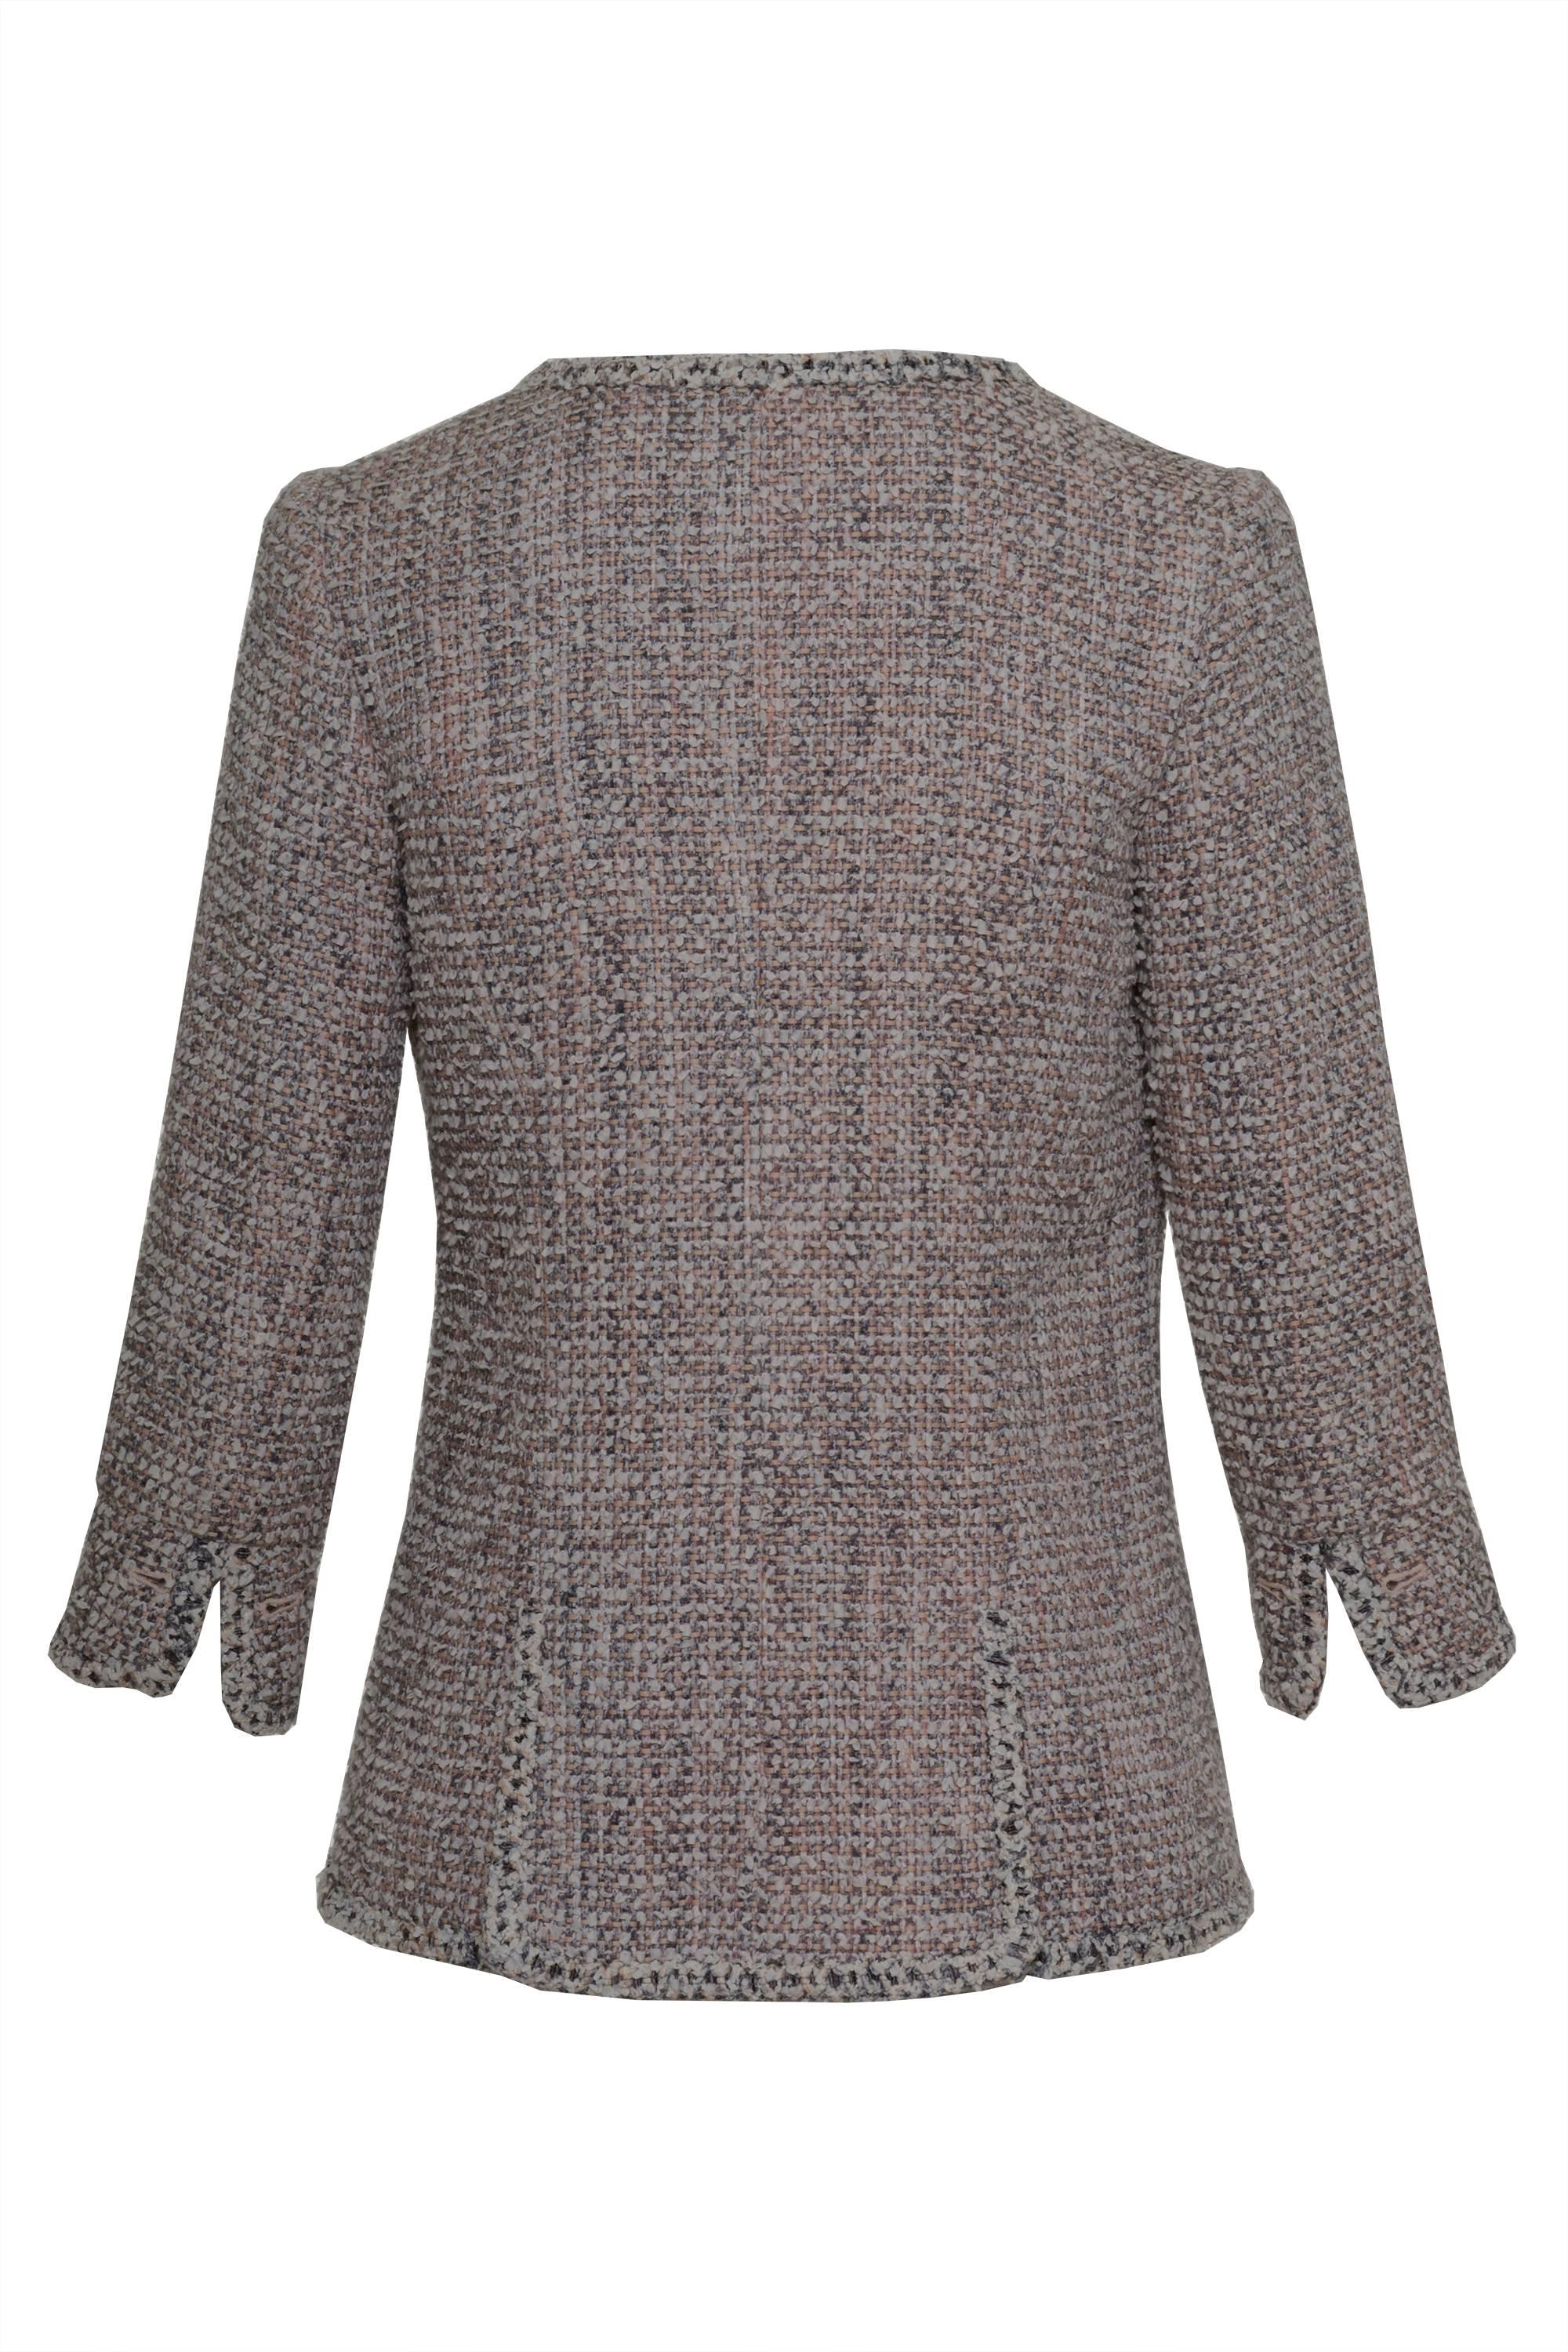 CHANEL Weave suit jacket made with special yarns weaved, the jacket has turn-up cuff, chained closure, with 2 frontal welt pockets,frontal armhole princess Seam, and waist darts taper back. Made in France.

Excellent Condition   

Label: Chanel Made